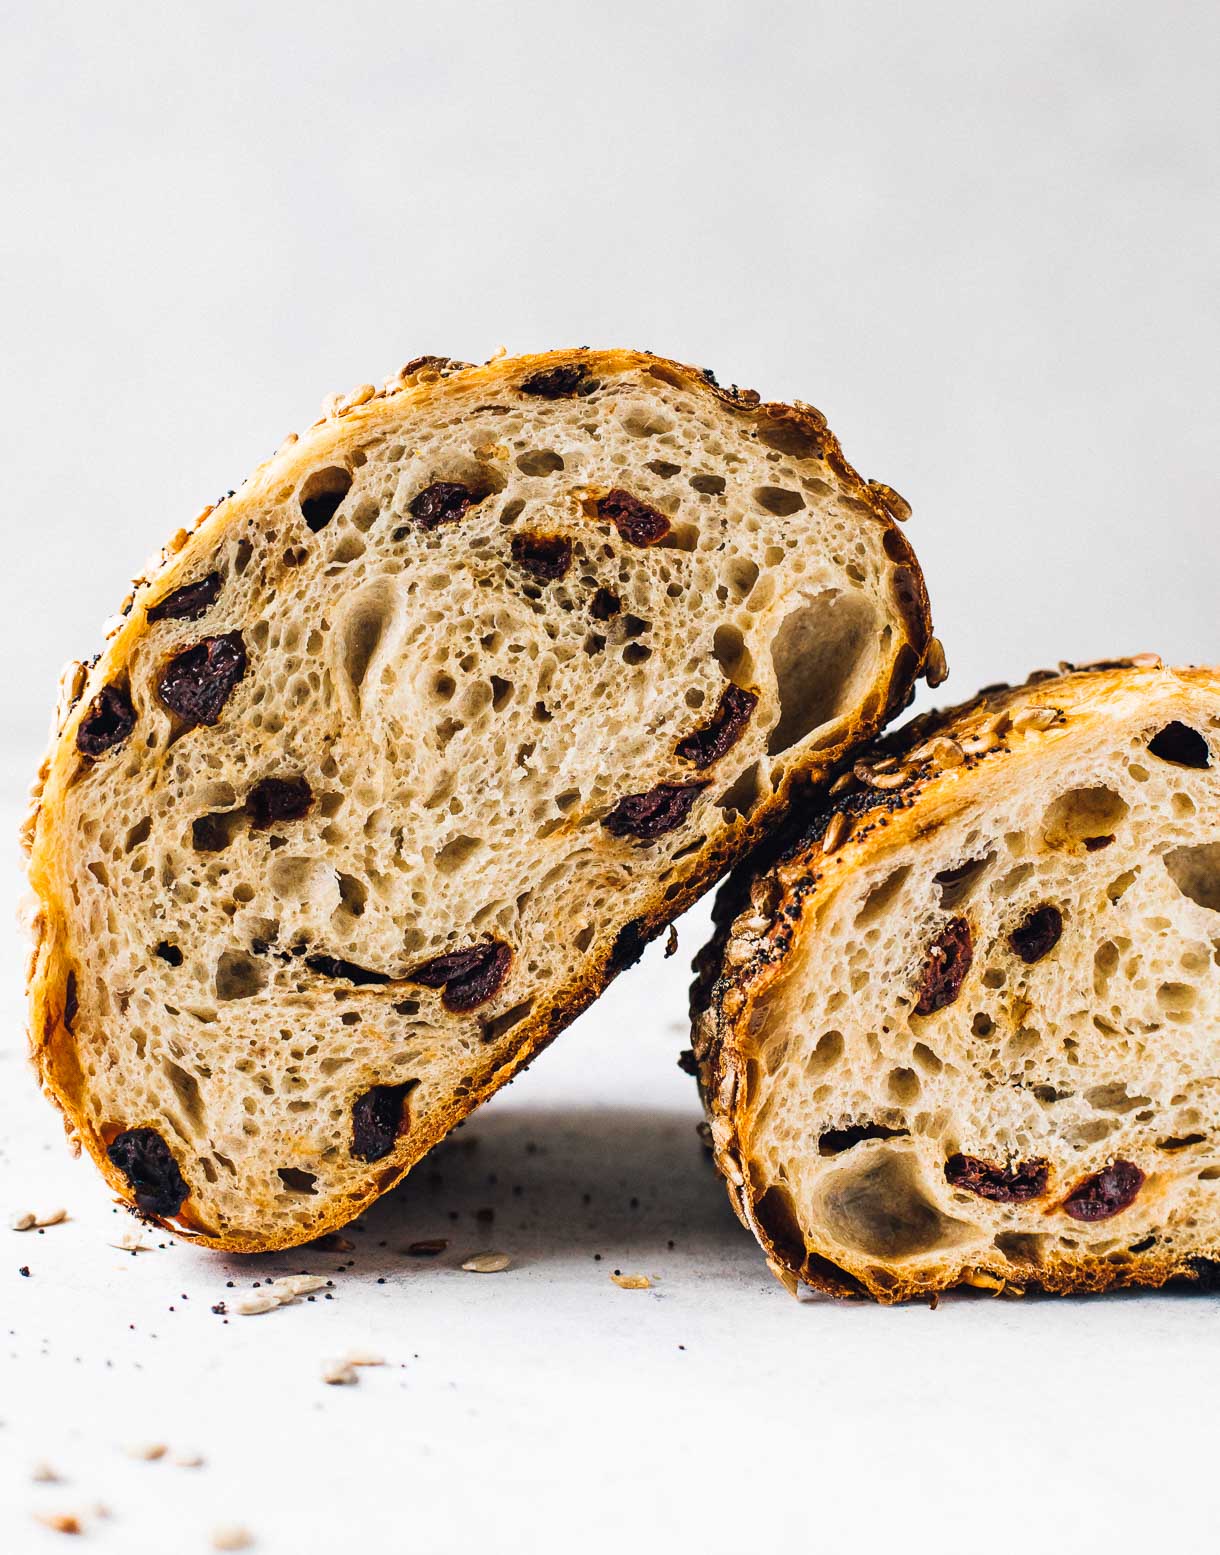 tart cherry sourdough bread, a loaf cut in half and showing the interior crumb